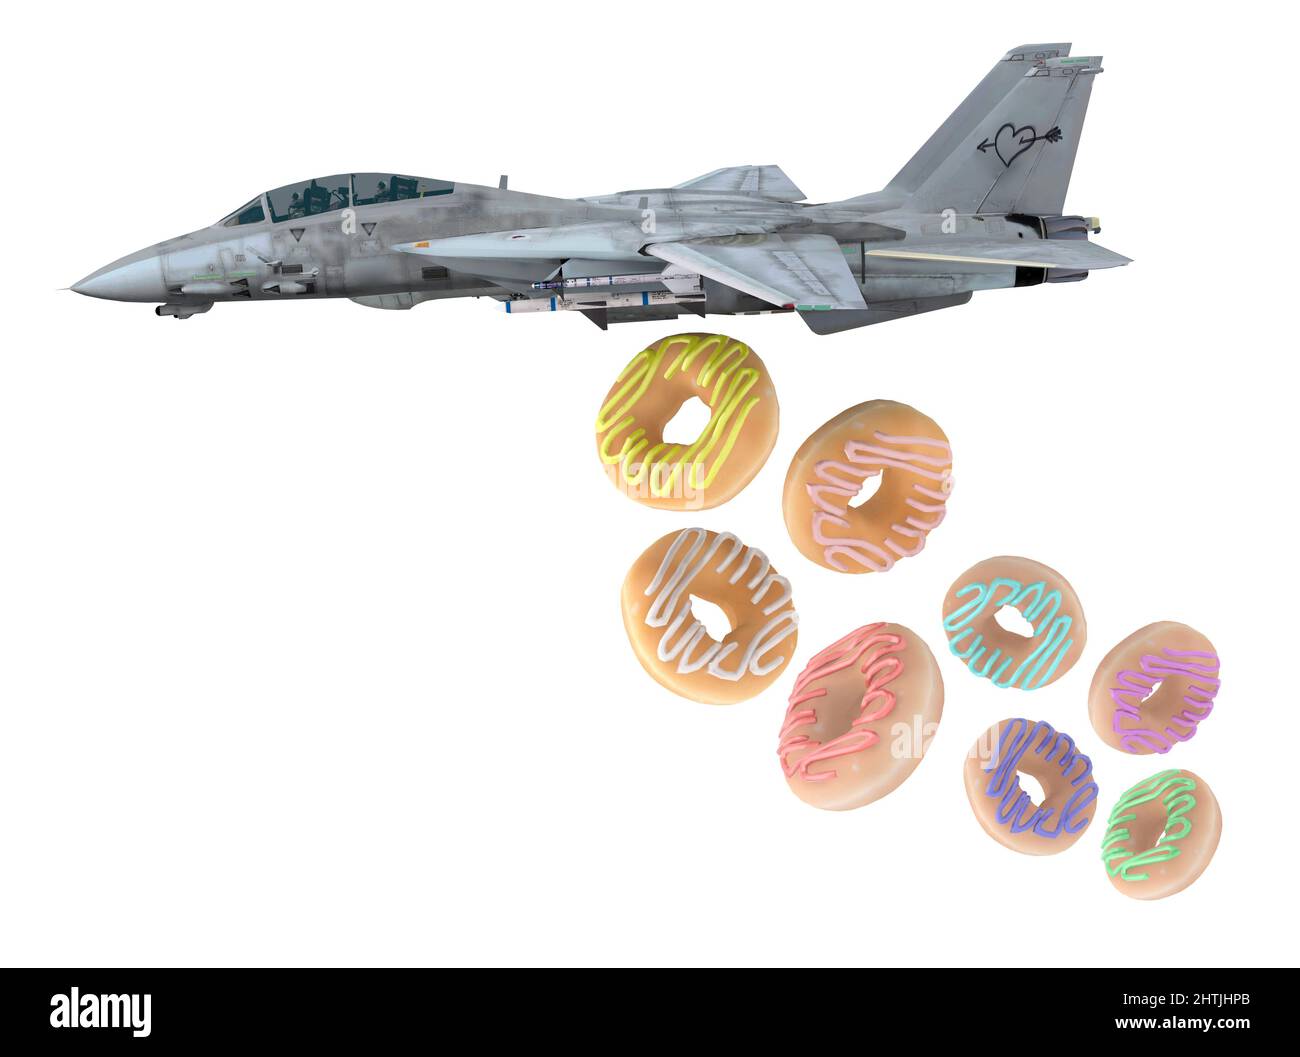 warplane launching donuts instead of bombs, make love not war concepts, 3d illustration Stock Photo